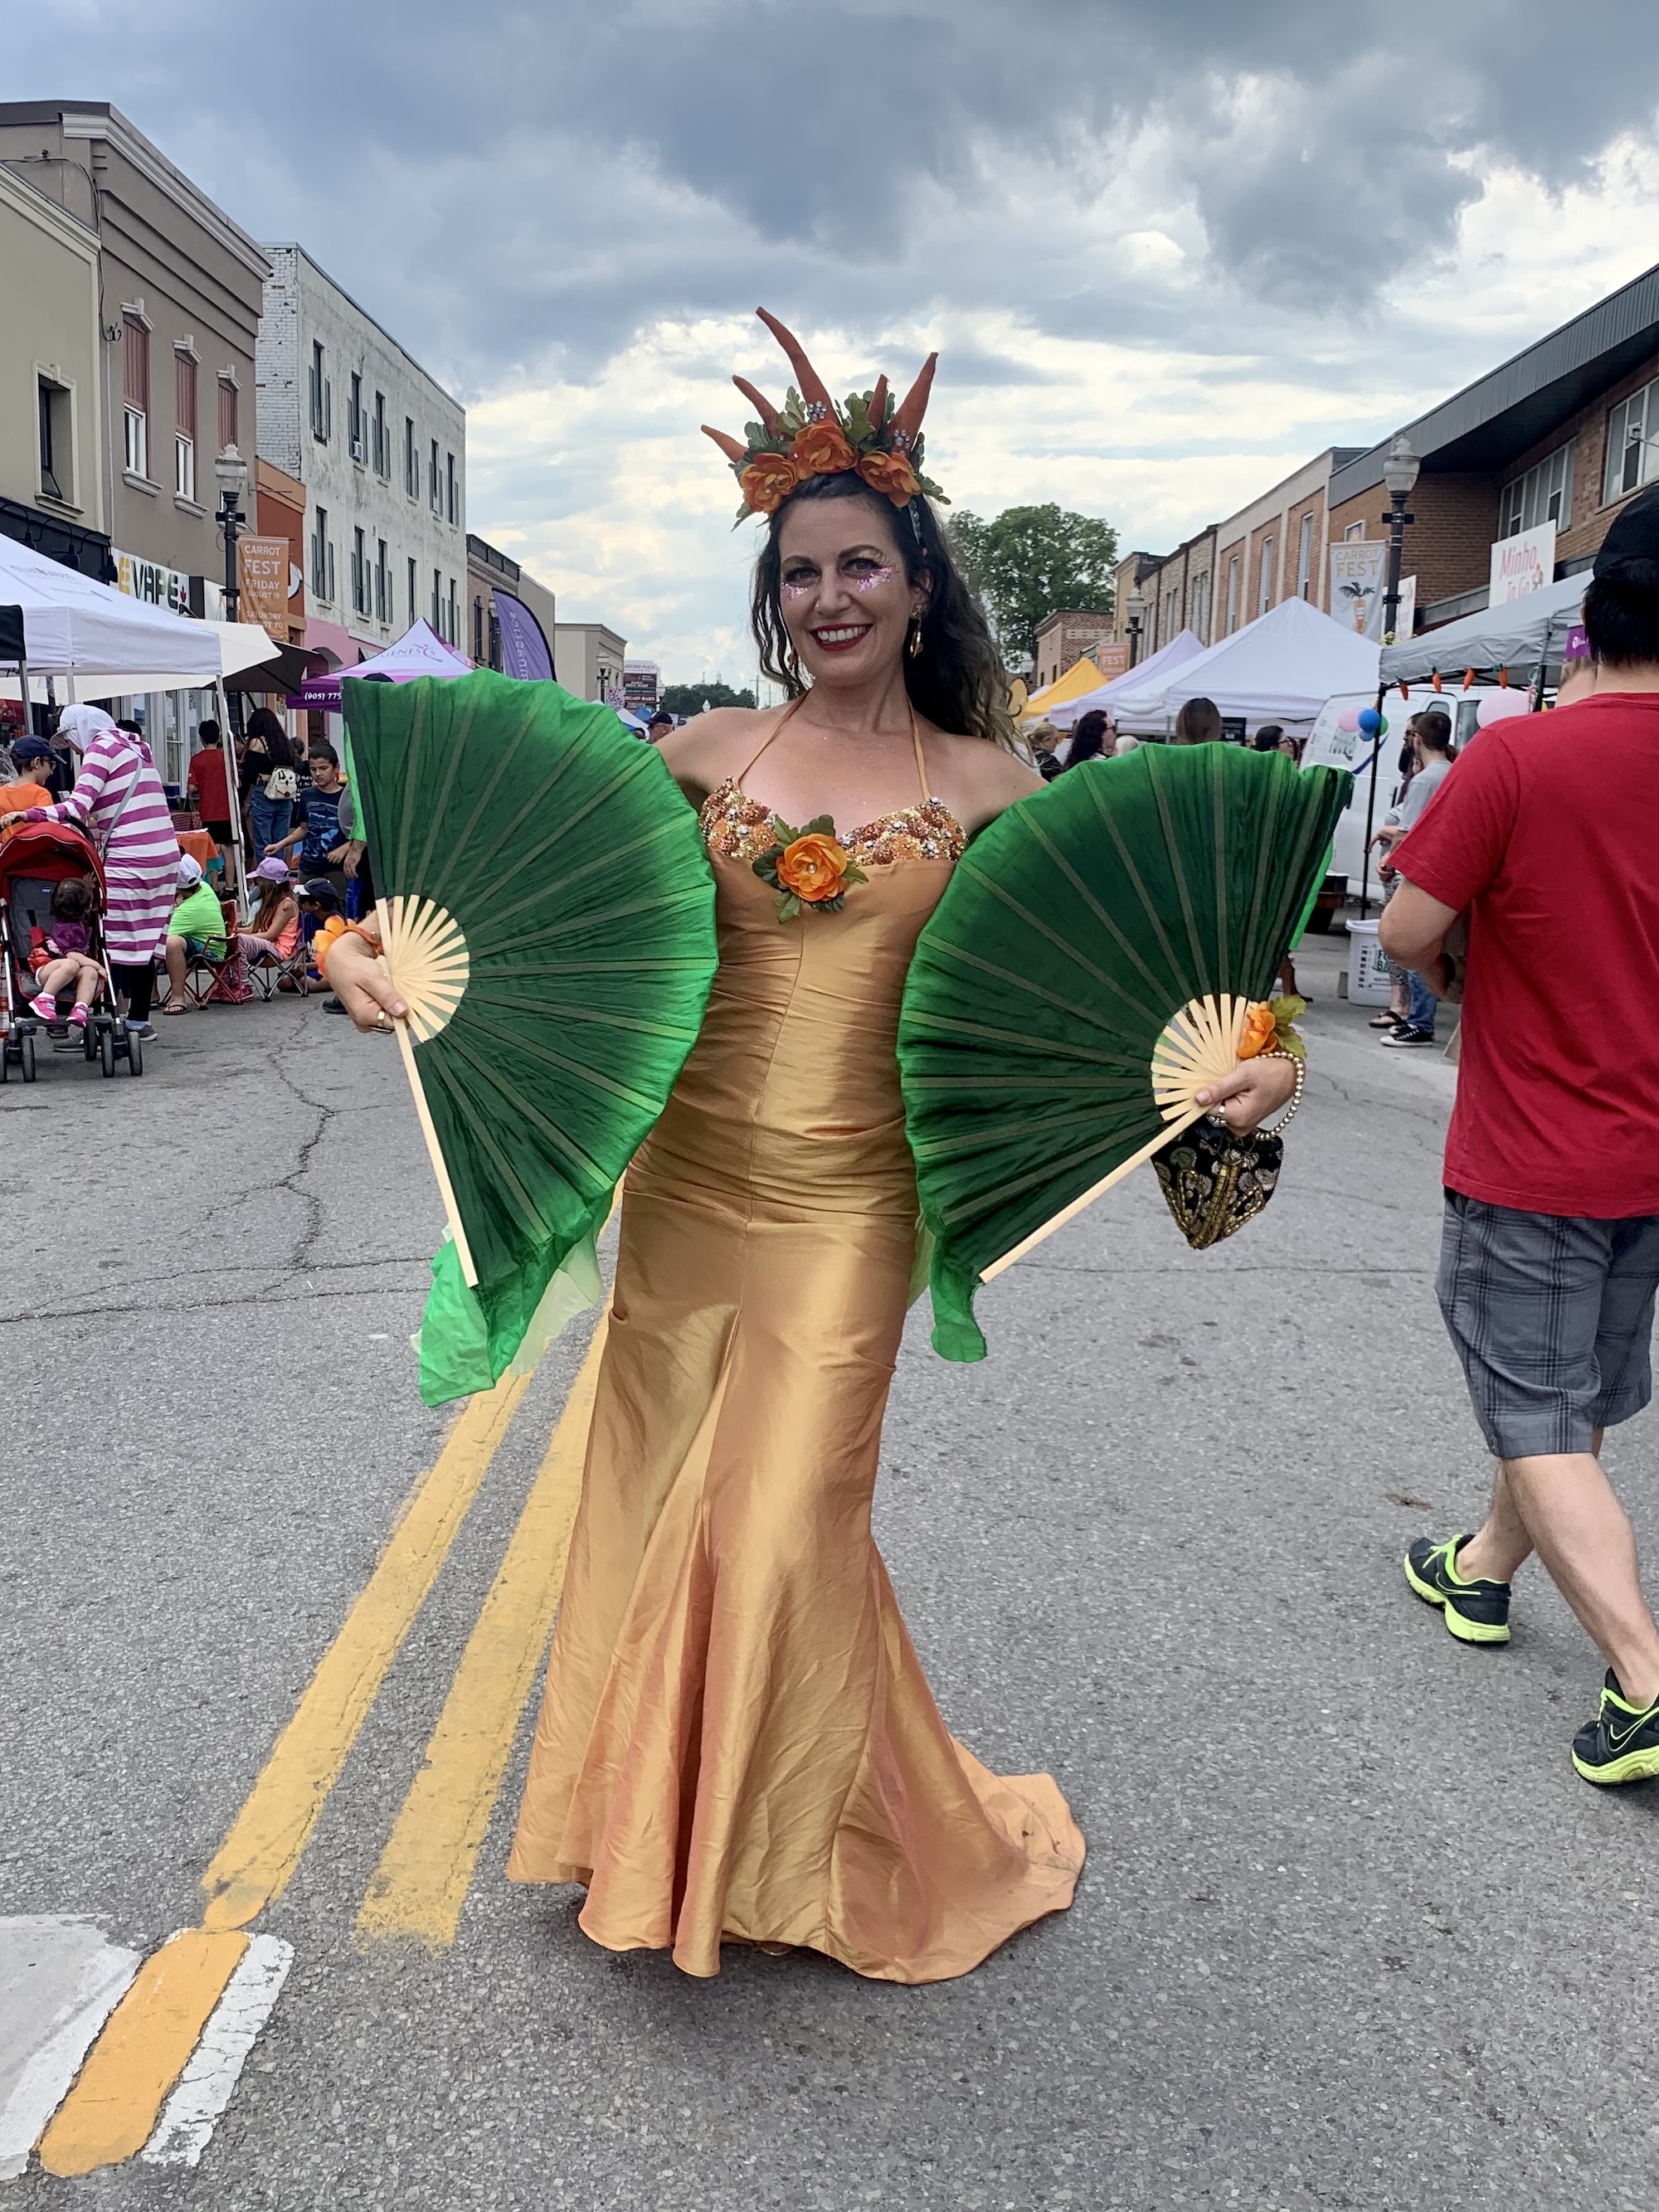 carrot queen at a fair with orange dress and green silk fans